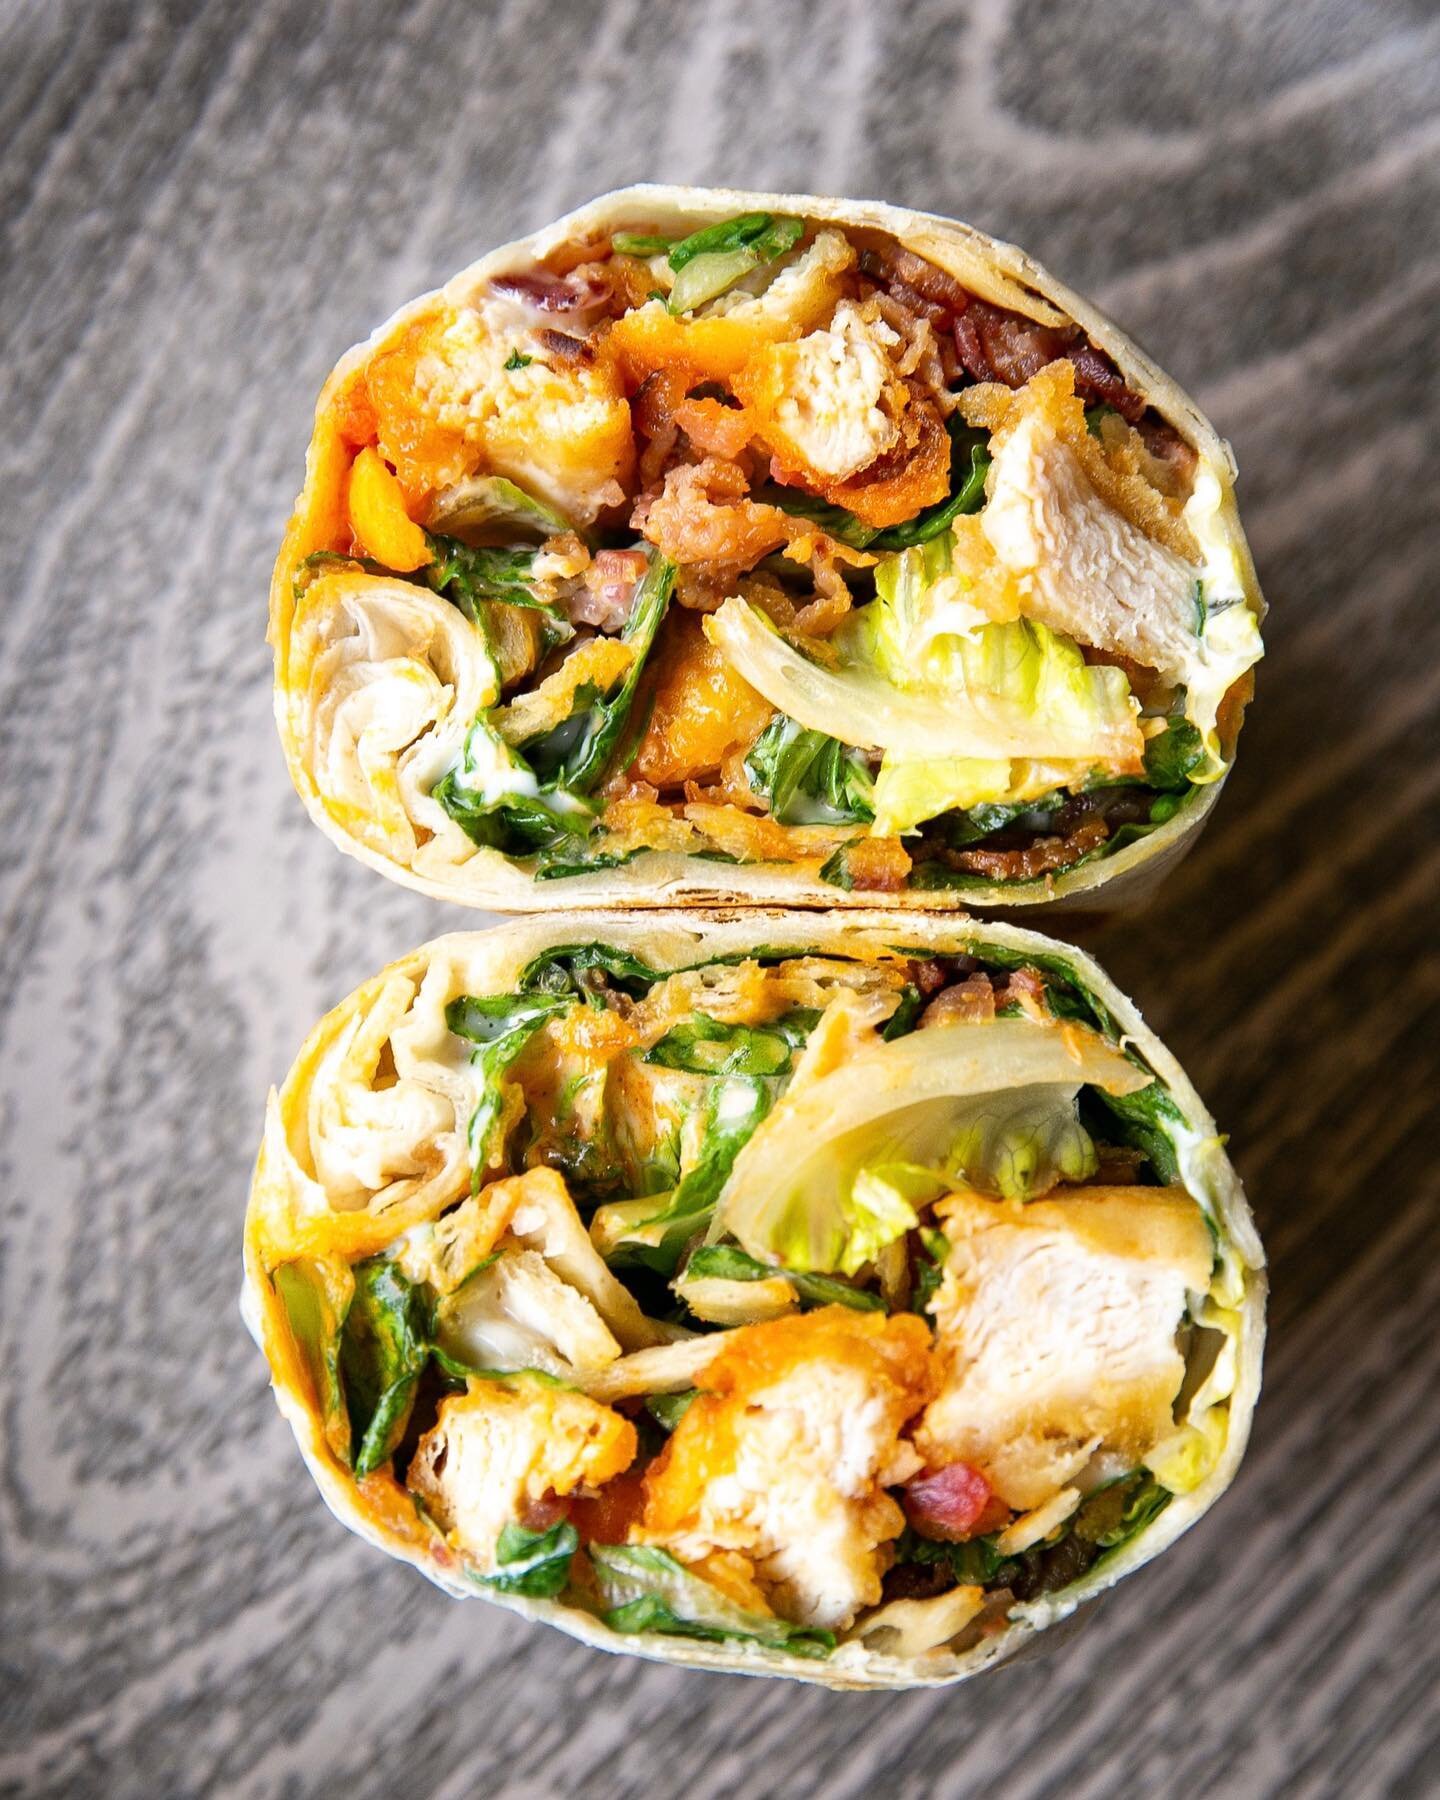 What wrap dreams are made of! 💭 

One of our most underrated menu items&mdash;
The Buffalo Crispy Chicken Wrap 🔥 

Open tomorrow until 2:00! #youllcraveit